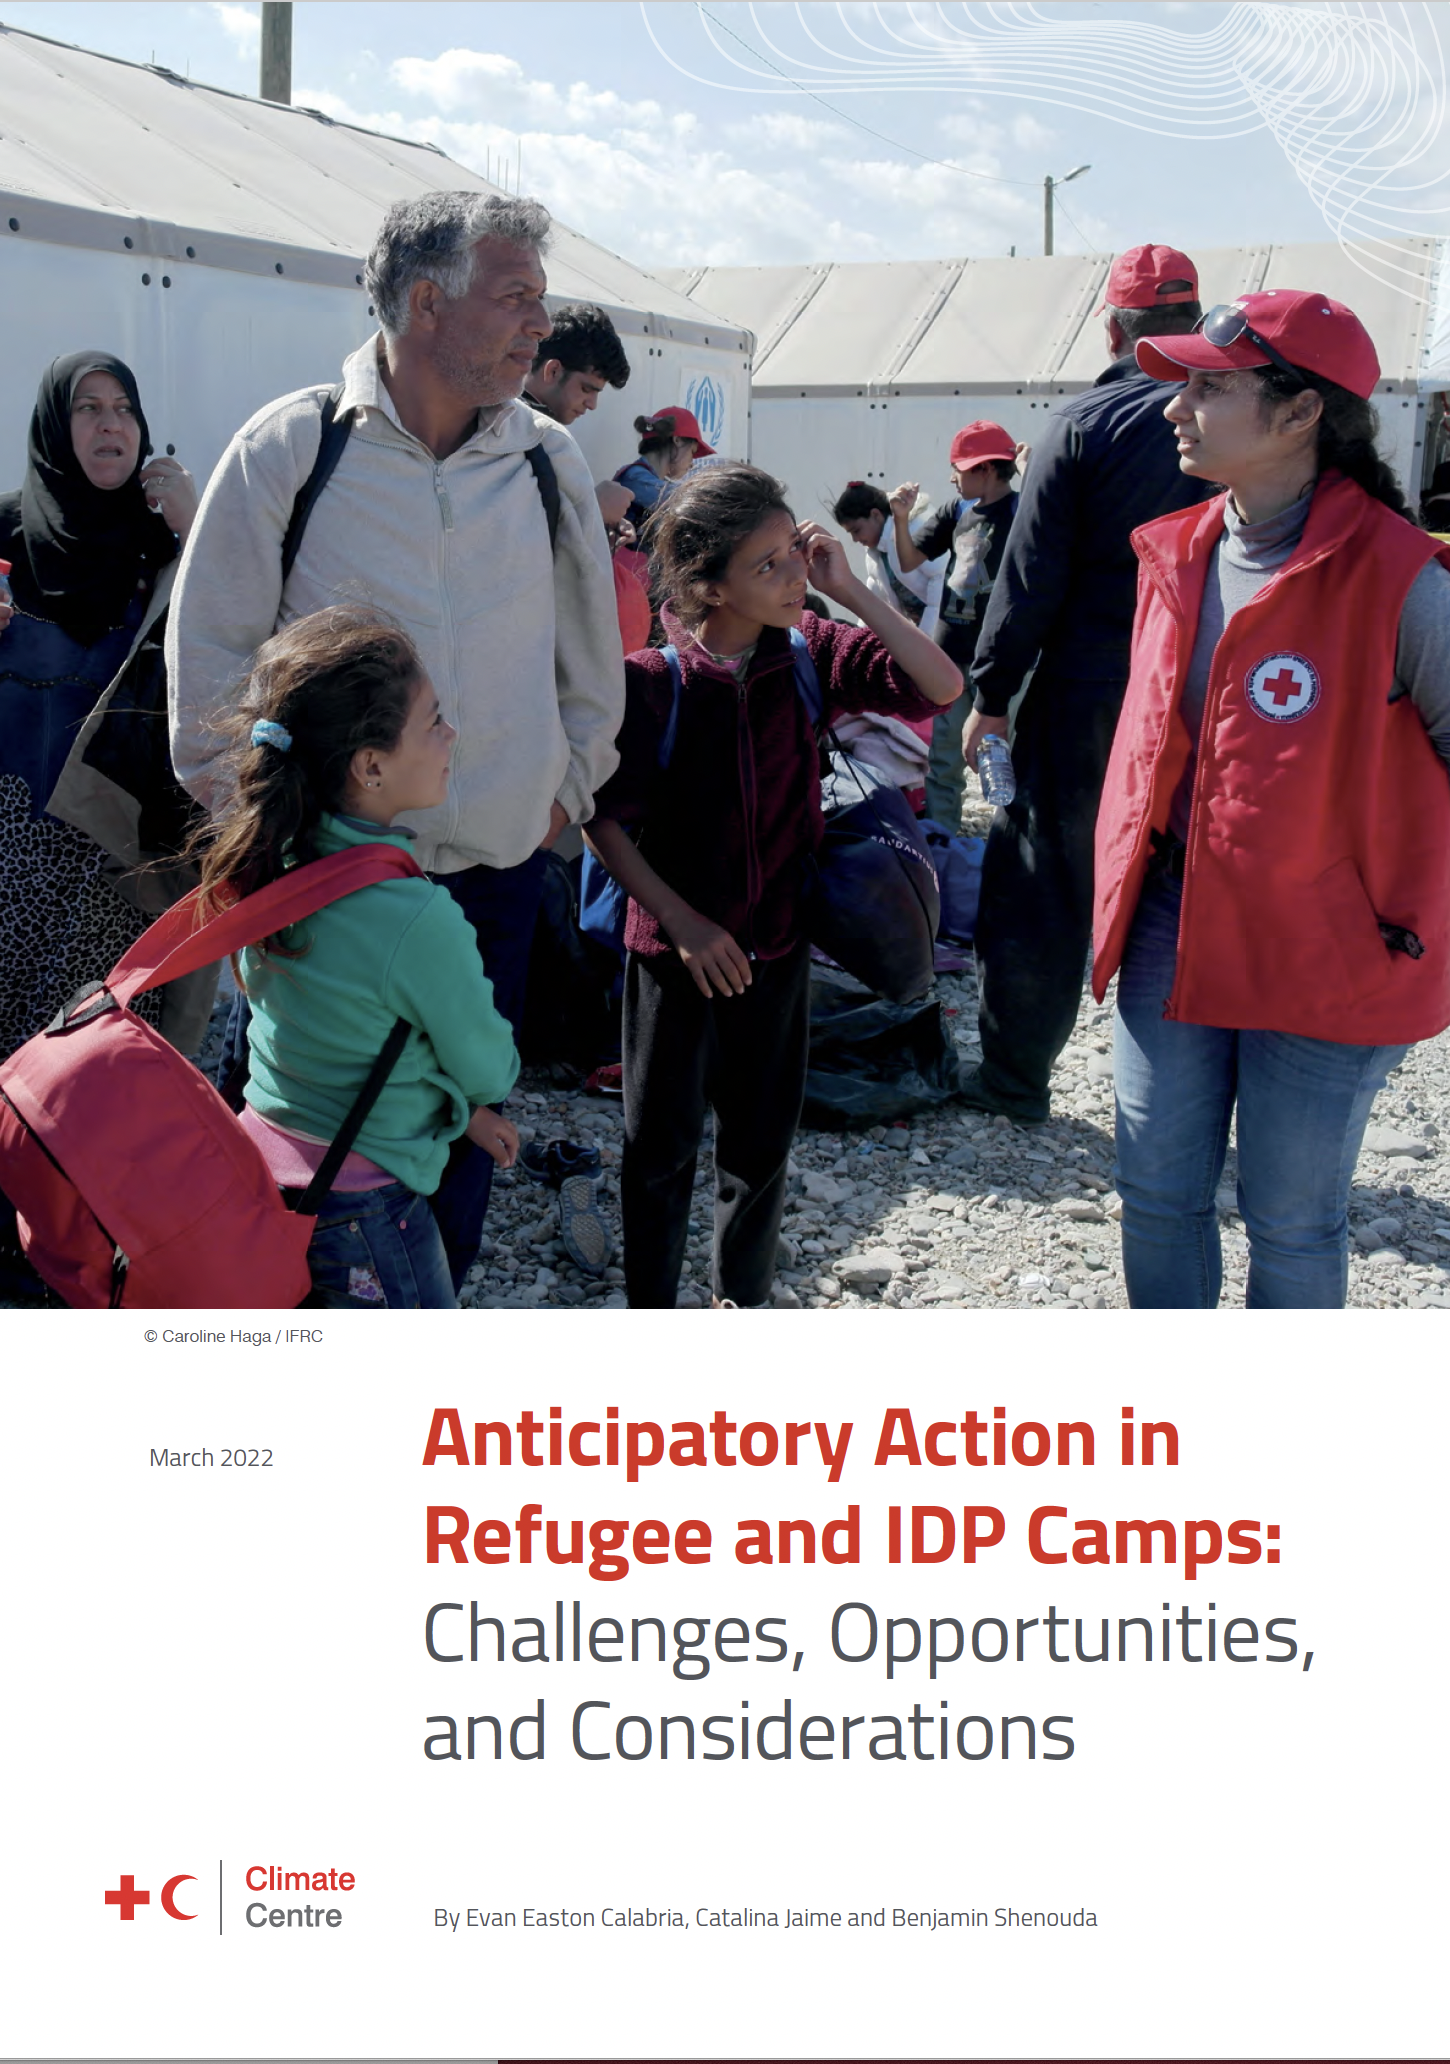  Anticipatory Action in Refugee and IDP Camps: Challenges, Opportunities, and Considerations 